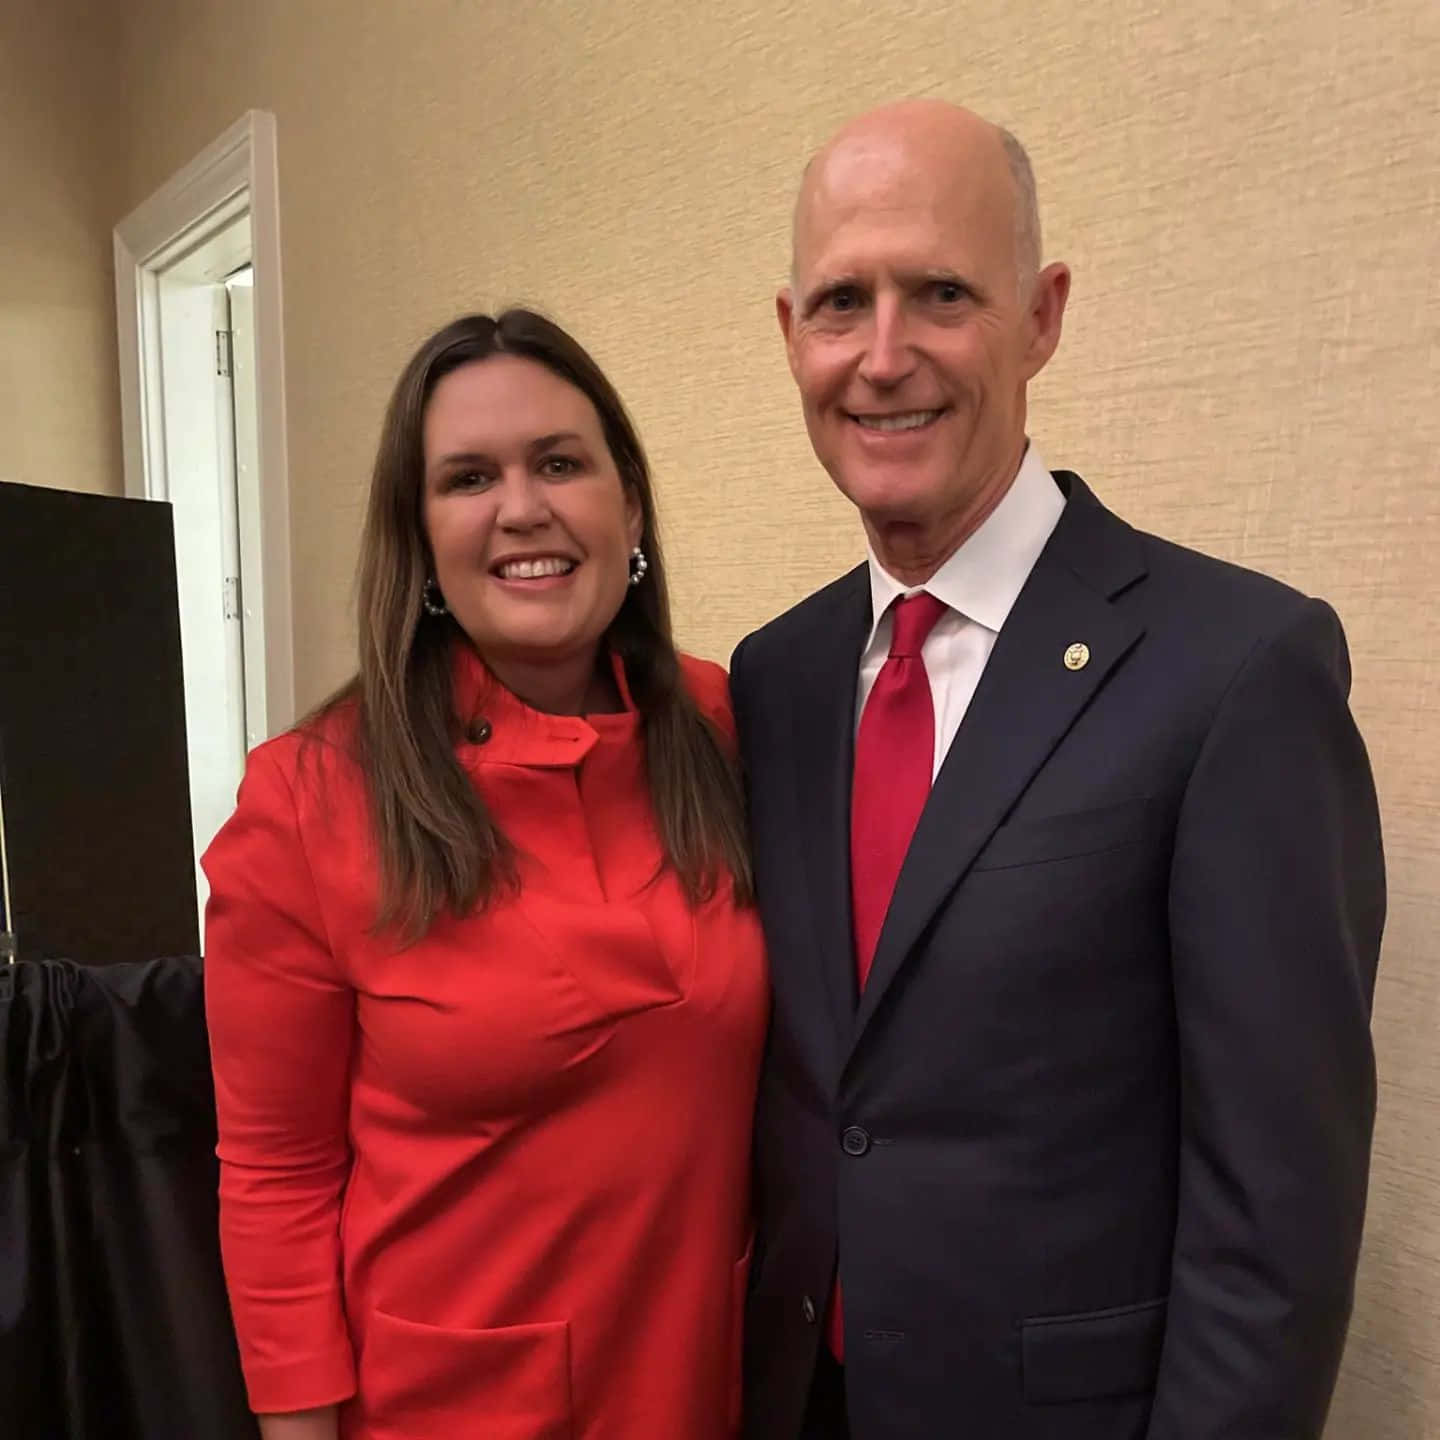 Former Florida Governor Rick Scott and former White House Press Secretary Sarah Huckabee Sanders in a friendly meeting. Wallpaper